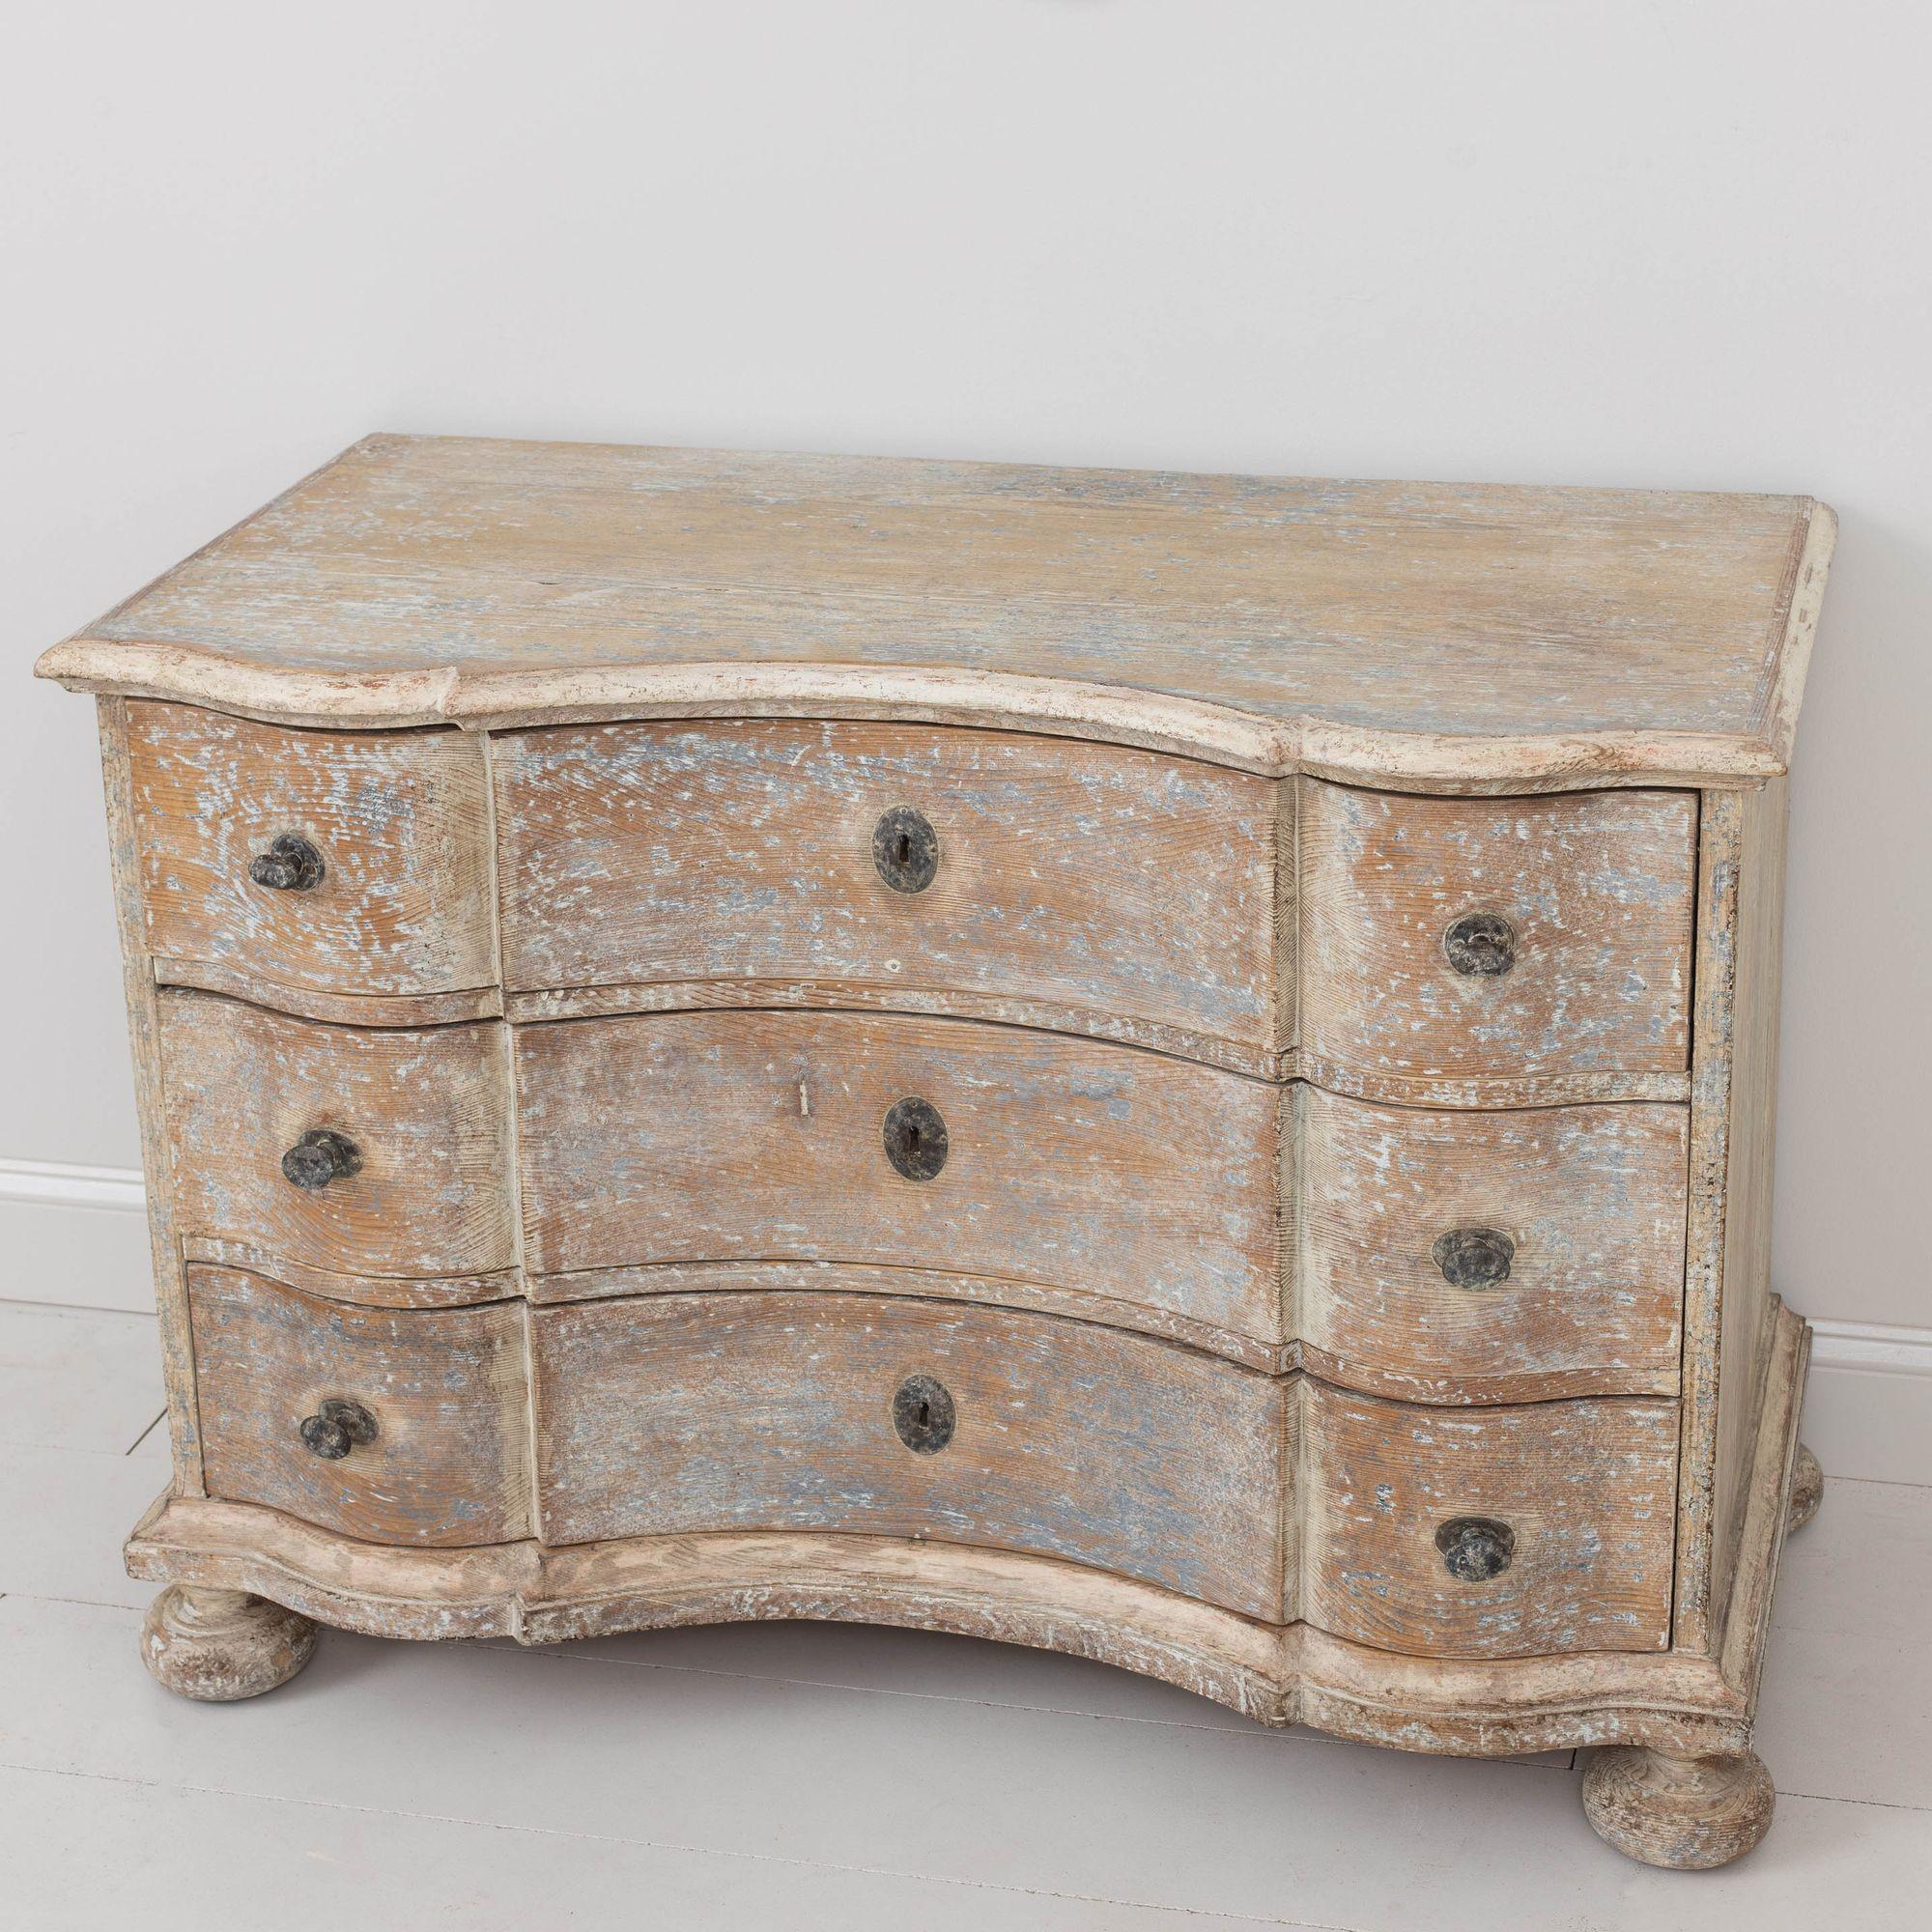 18th c. German Baroque Commode in Original Patina with Arbalette Shaped Front For Sale 4